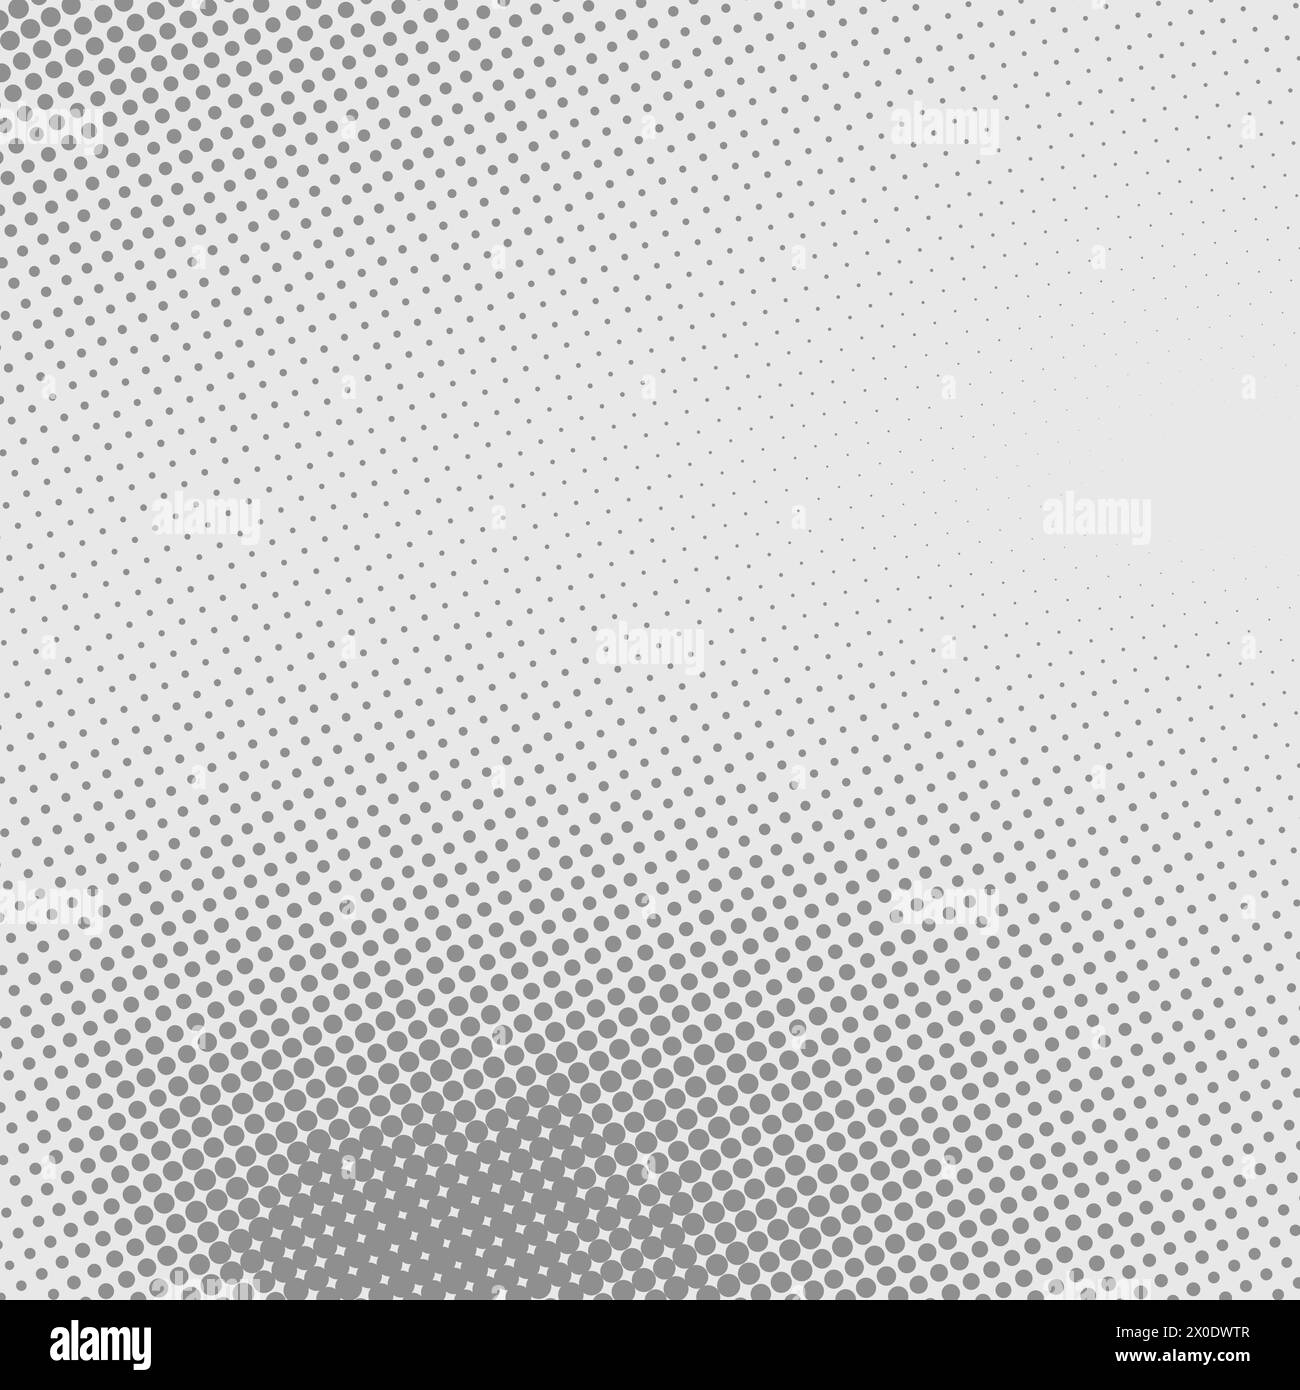 Grunge halftone vector background. Halftone dots vector texture. Abstract wave halftone black and white. Monochrome texture for printing on badges Stock Vector